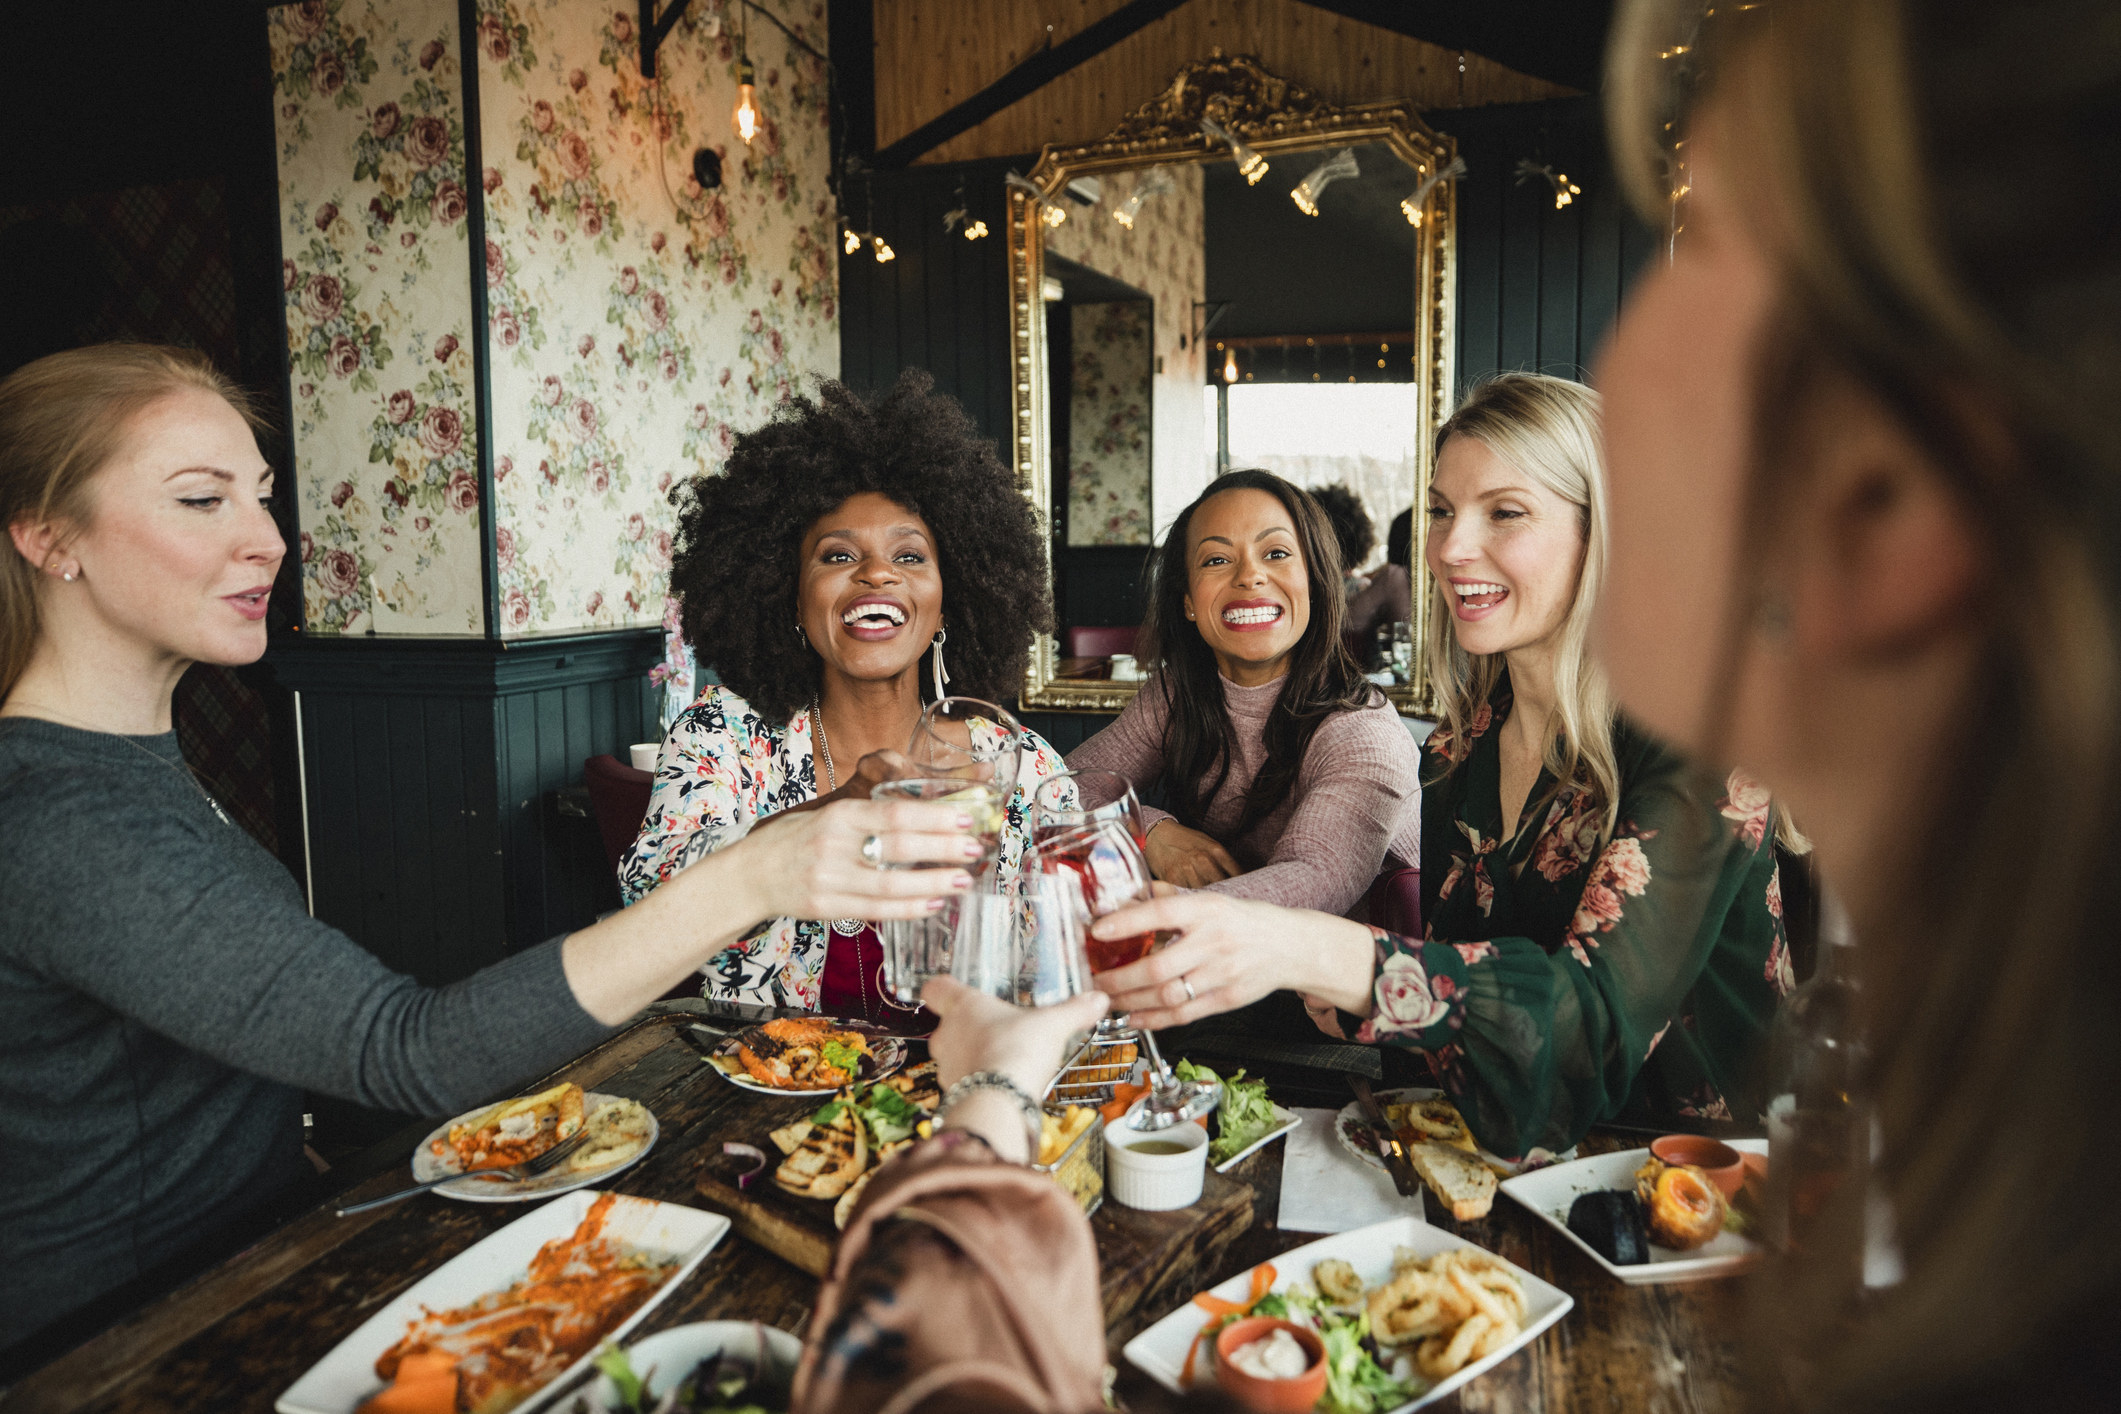 A group of women toasting at dinner